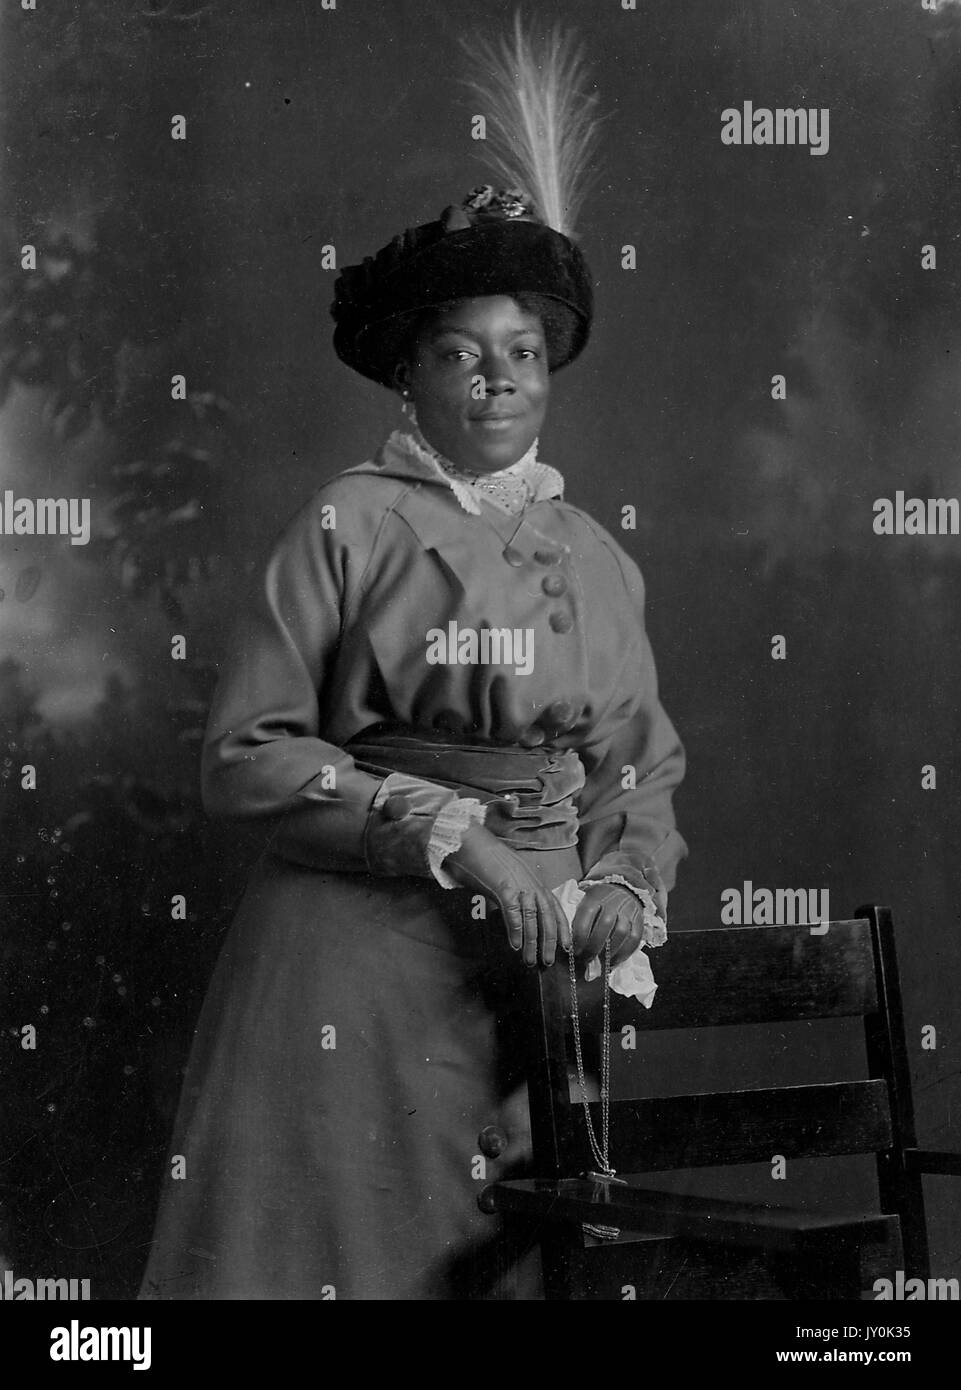 Portrait of an African American woman named Mattie E Bradford, she is wearing a long dress that is cinched at the waist, she is wearing a light colored shirt underneath, she is wearing gloves and a dark colored hat with a feather, her hands are resting on the back of a chair that is placed in front of her, a necklace dangles in her hands, she is smiling, The Electric Studio, 162 Thames St, Newport RI and Other Cities, 1915. Stock Photo